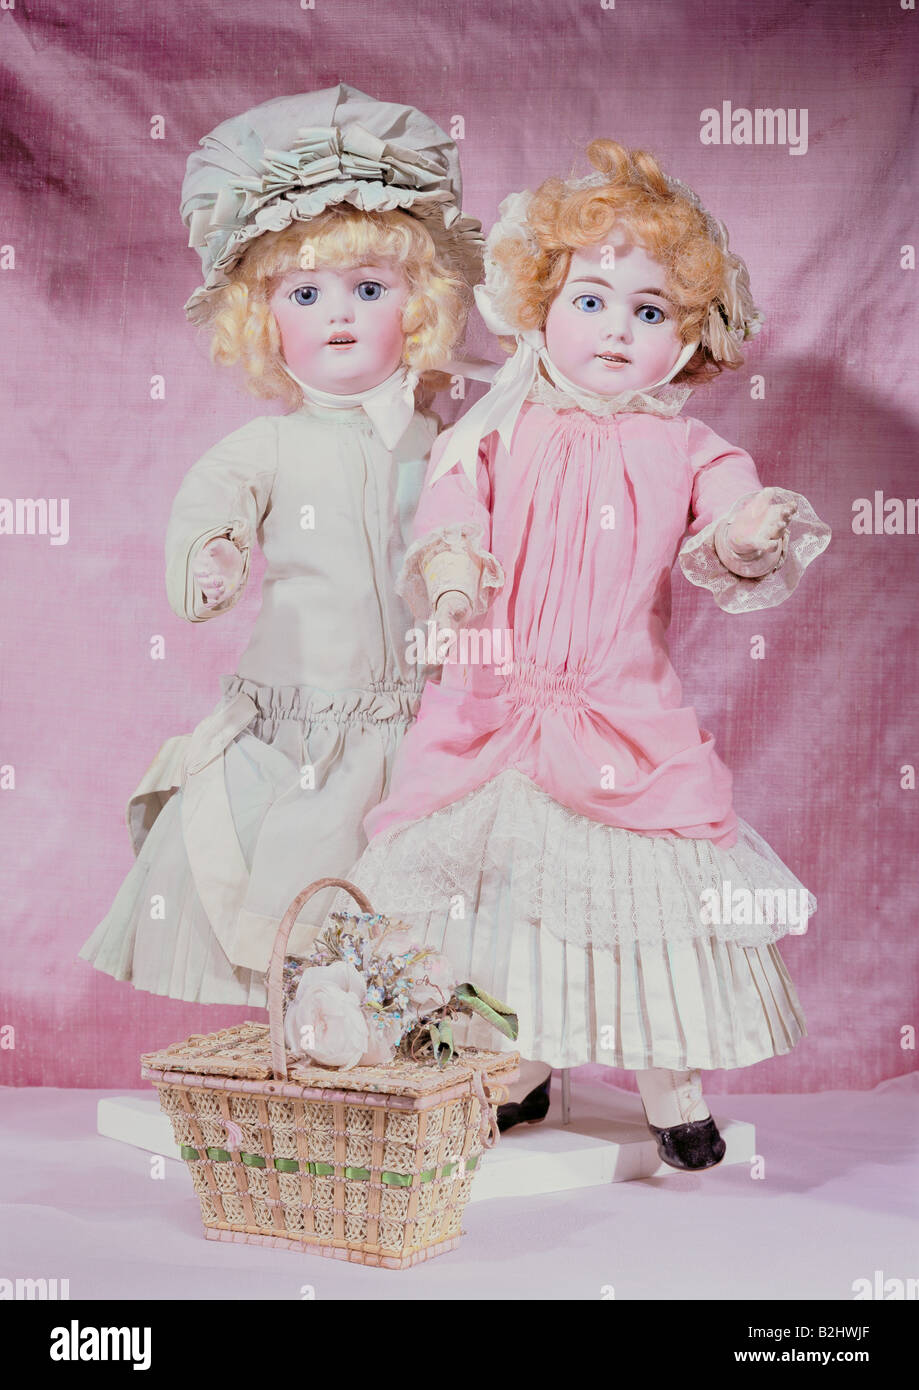 toys, dolls, two jointed dolls, left: wood, bique porcelain, mohair, height 49 cm, Graefenhain, Germany, circa 1910, right: wood, bisque porcelain, by Johannes Christian Lindner, height 48 cm, Sonneberg, Germany, circa 1900, Munich City Museum, Stock Photo